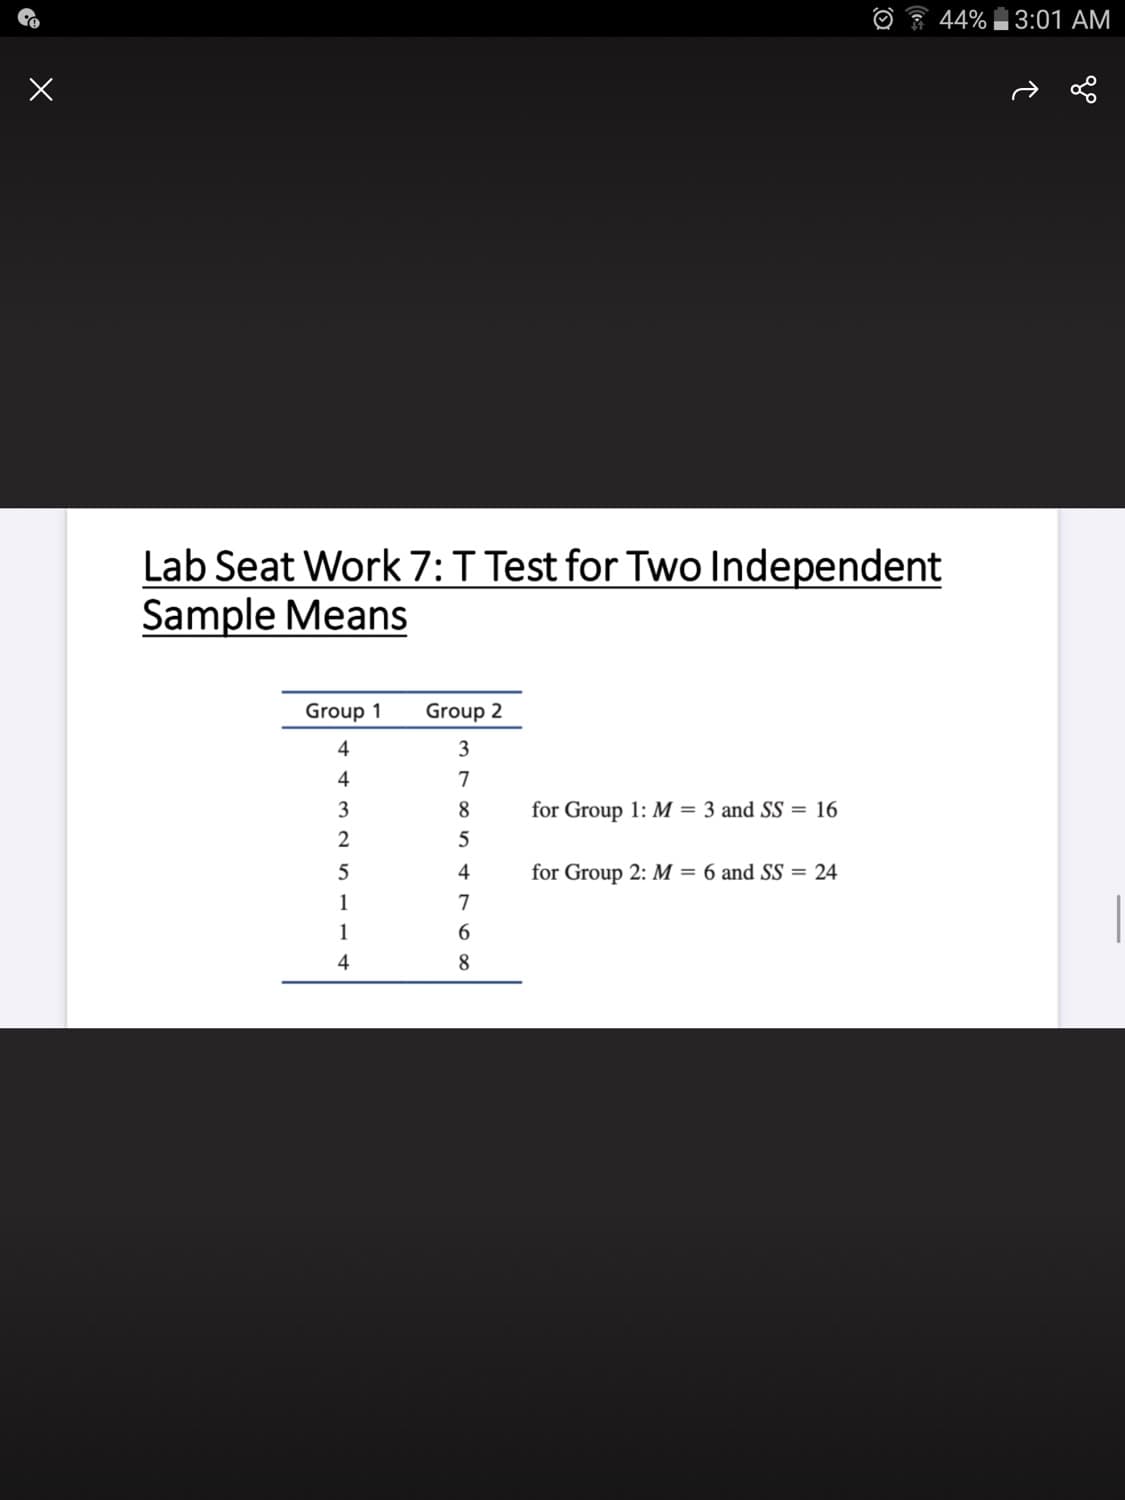 44% 3:01 AM
Lab Seat Work 7:T Test for Two Independent
Sample Means
Group 1
Group 2
4
3
4
7
3
8.
for Group 1: M = 3 and SS = 16
2
4
for Group 2: M = 6 and SS = 24
1
7
1
6.
4
8.
